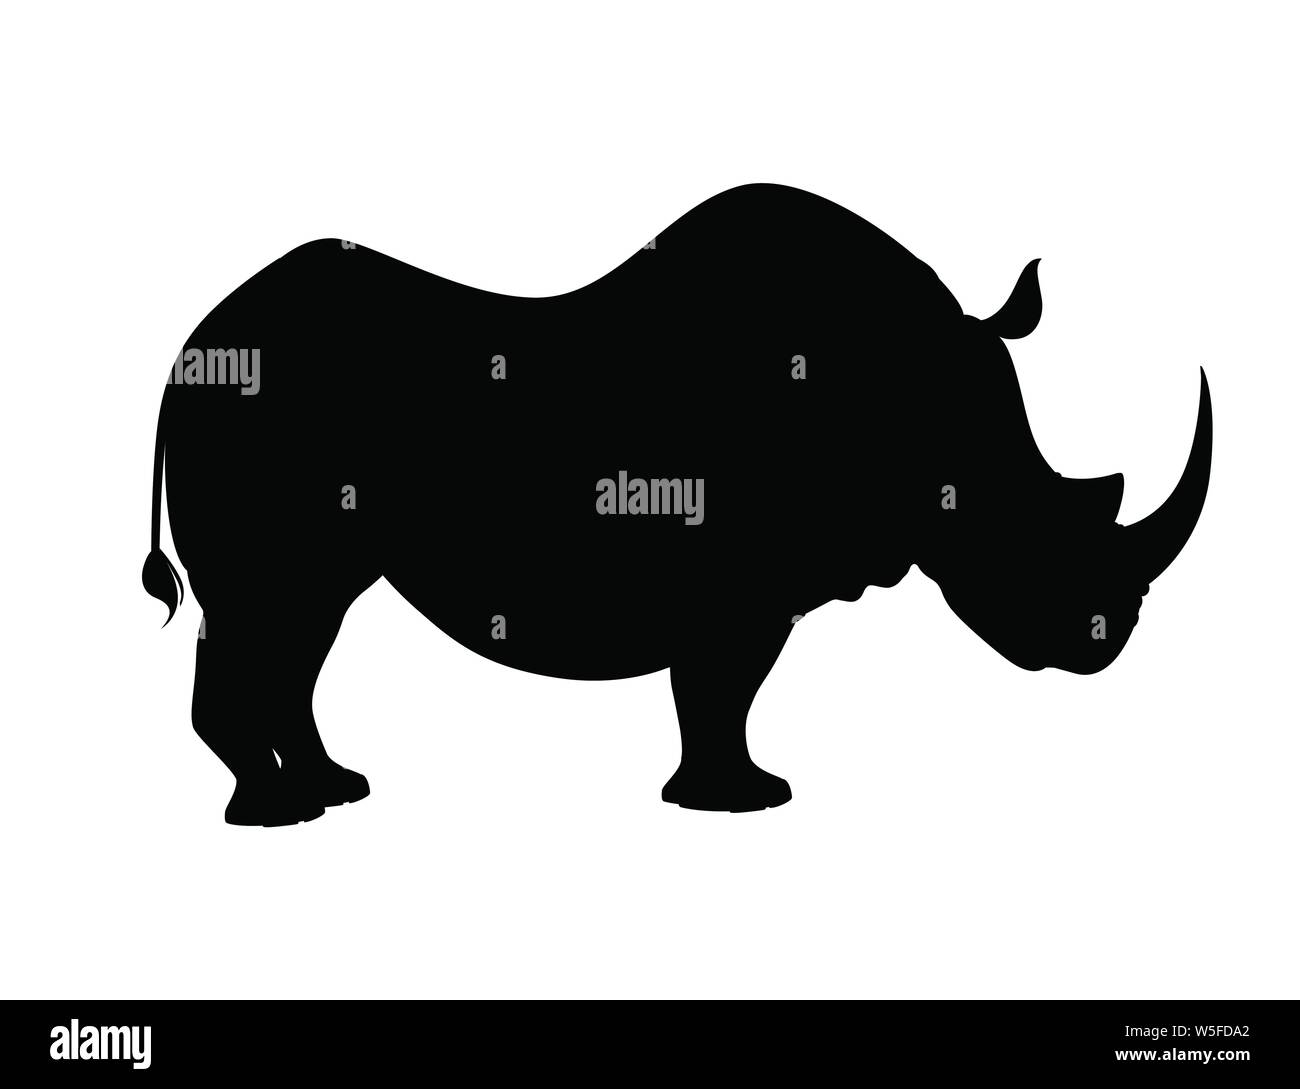 Black silhouette african rhinoceros side view cartoon animal design flat vector illustration isolated on white background. Stock Vector